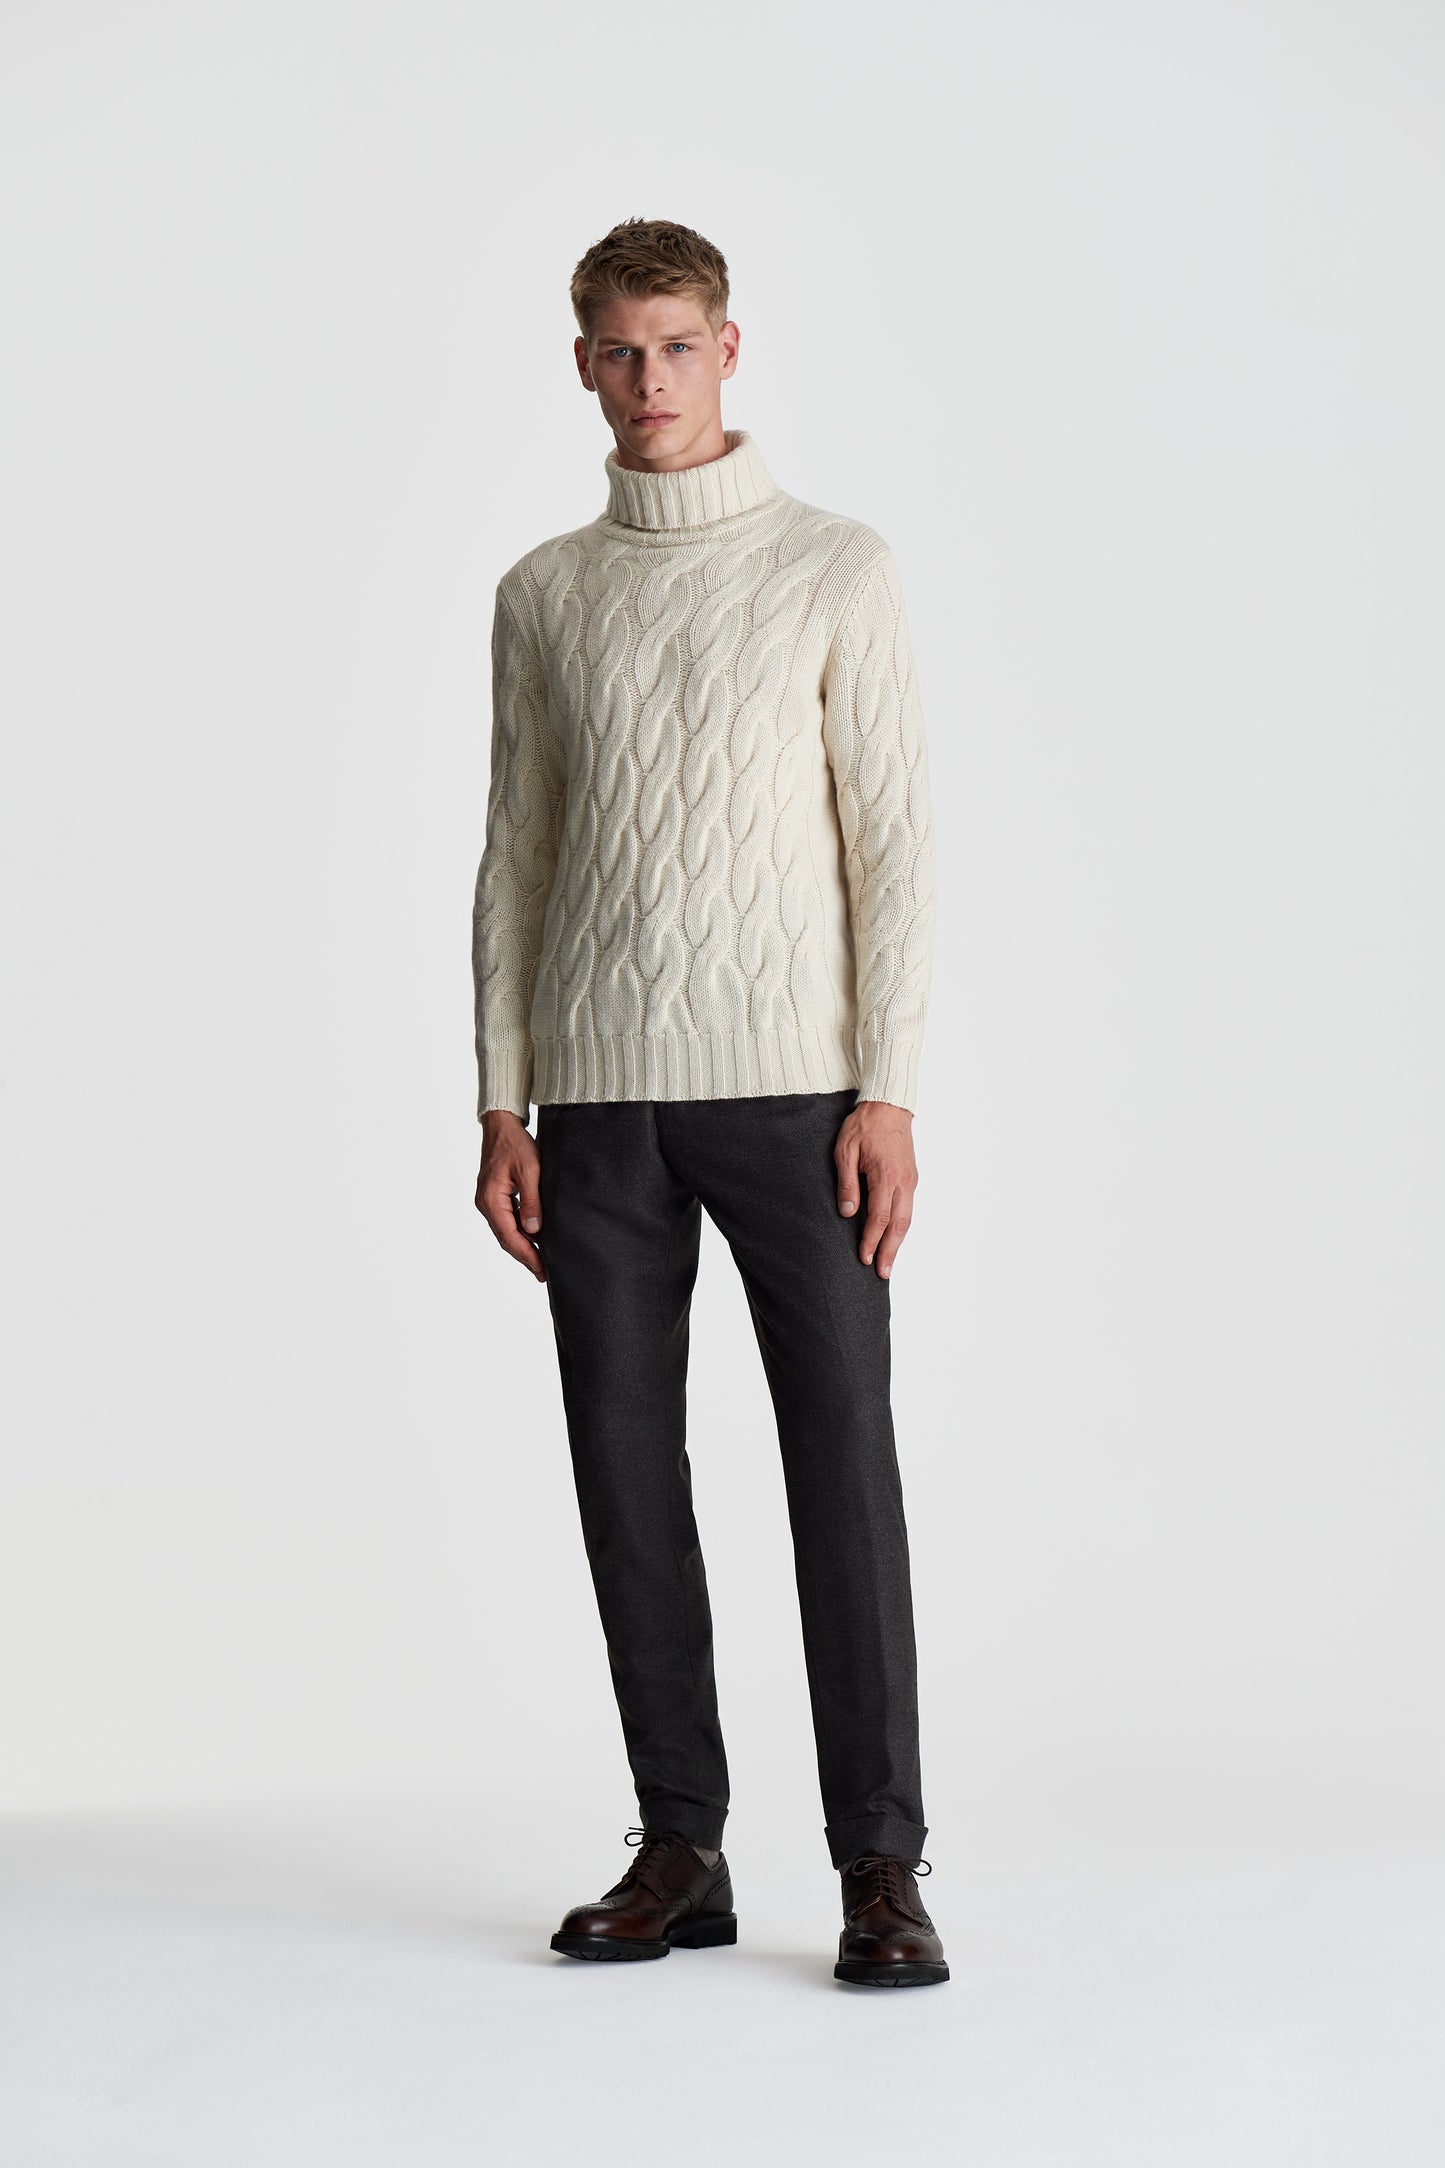 Chunky Cashmere Cable Knit Sweater Off-White Model Image